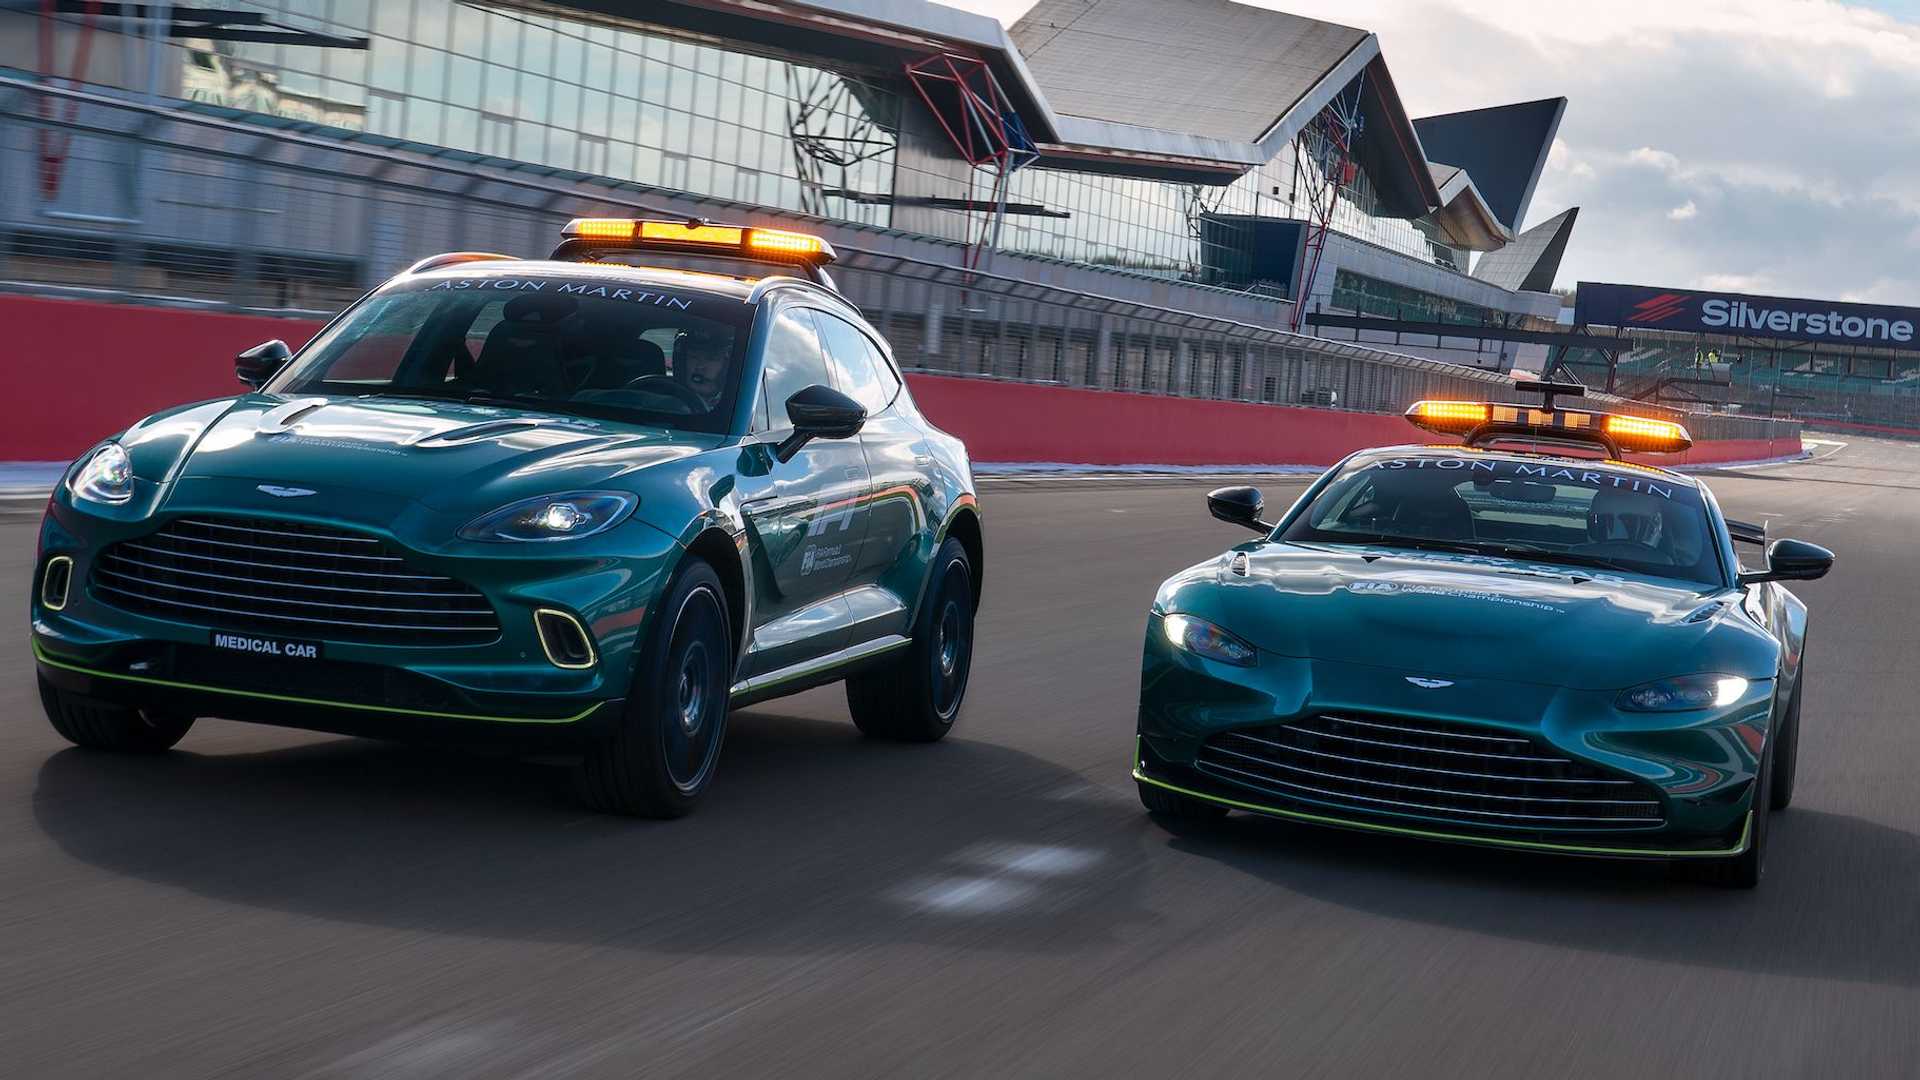 Aston Martin Shows Off Official F1 Safety, Medical Cars For 2021 Season